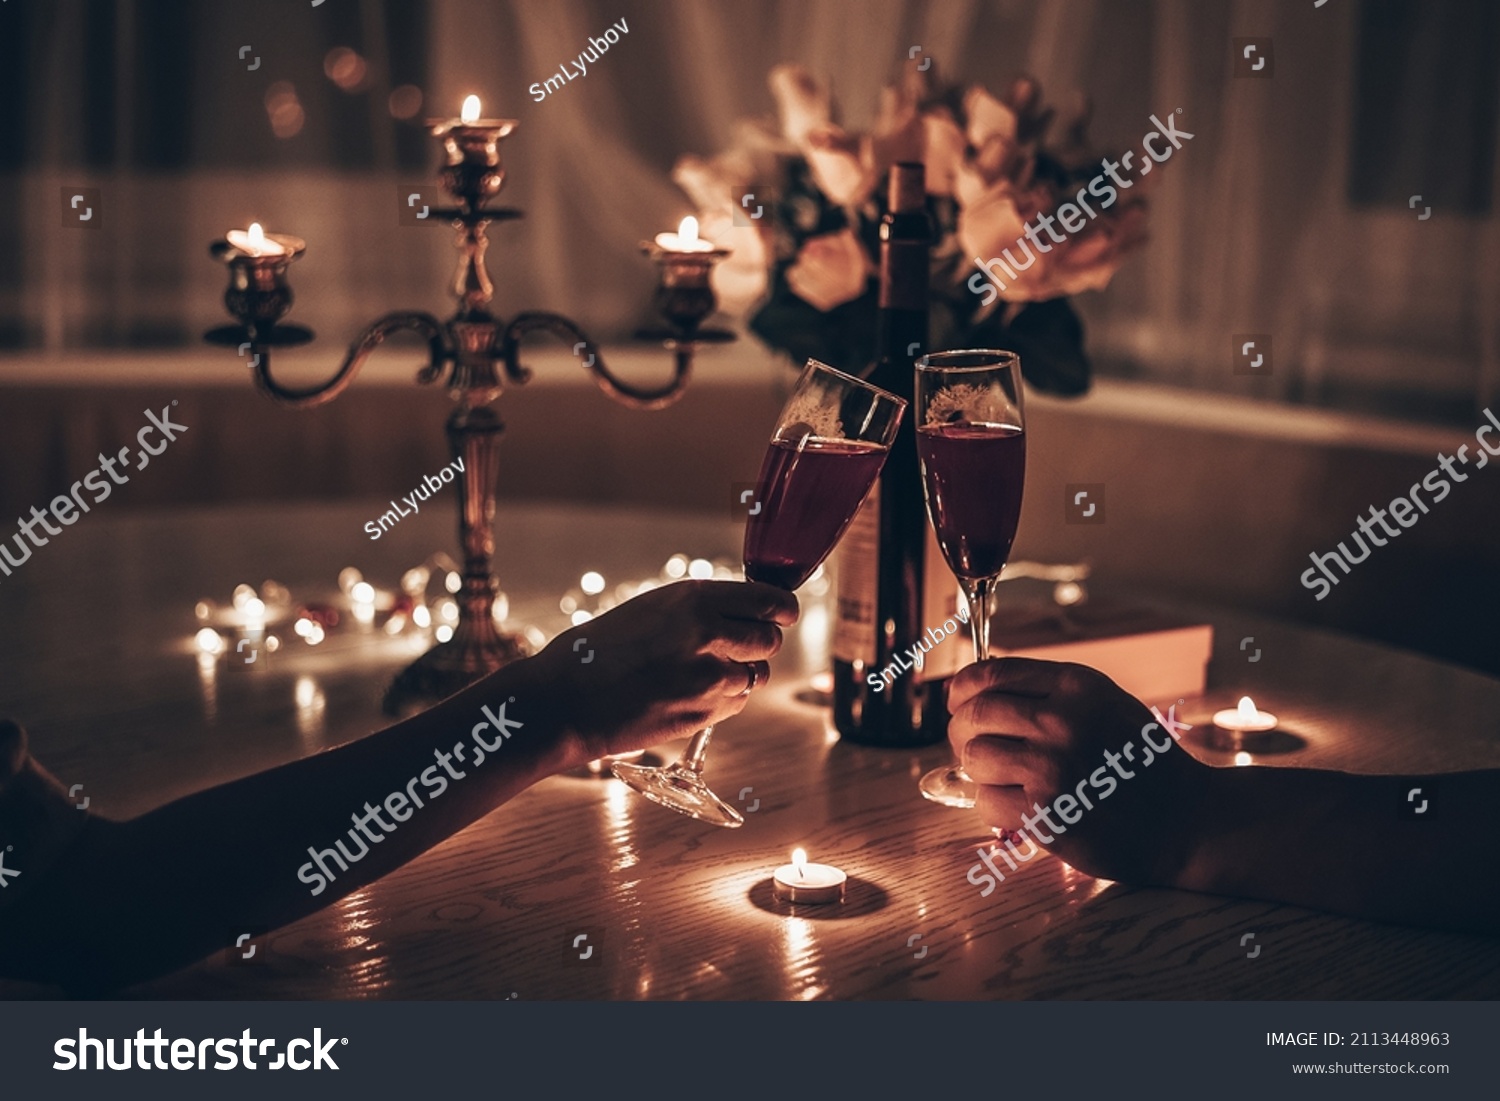 Hands man and woman holding glasses of wine having romantic candlelight dinner at table at home. Hands man and woman holding glass of wine. Concept of Valentine's day or Candlelight date at night. #2113448963